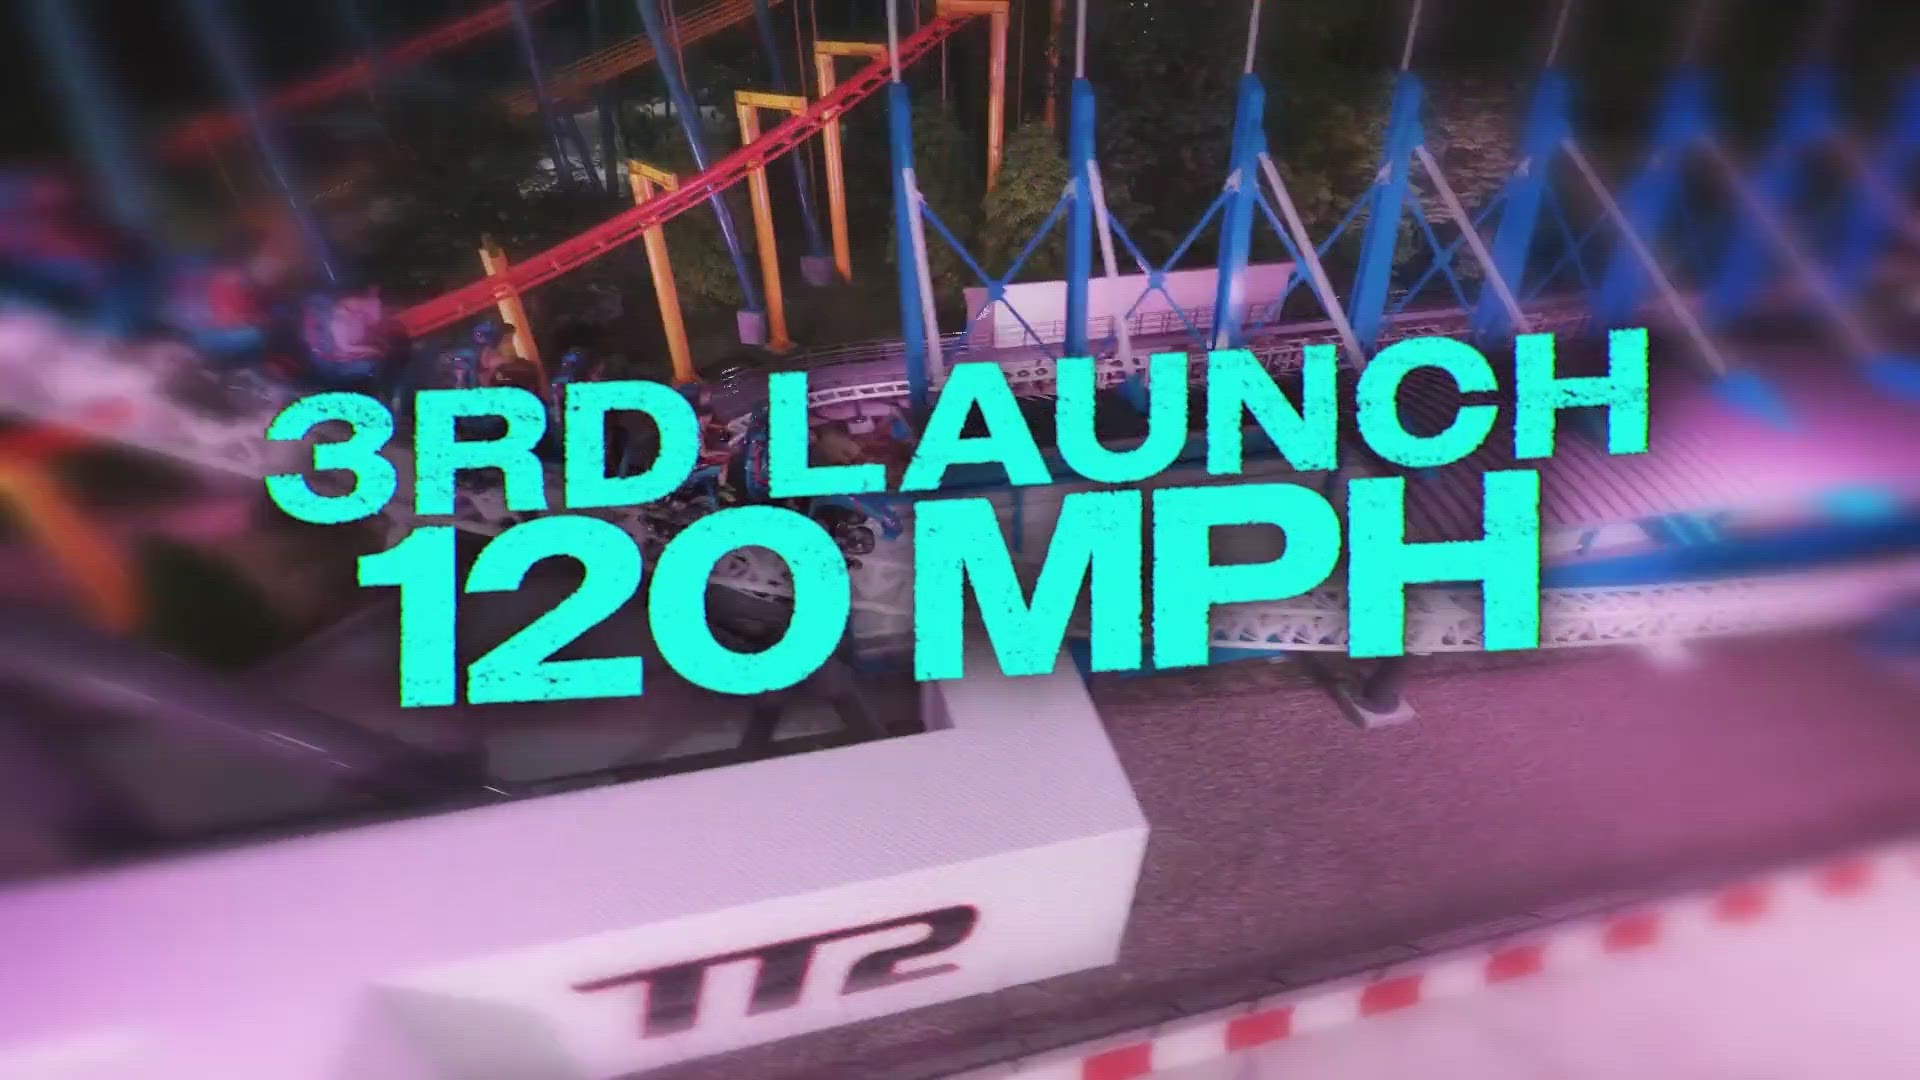 Here's the ride trailer for the new Top Thrill 2 roller coaster, which is set to open at Cedar Point in 2024.